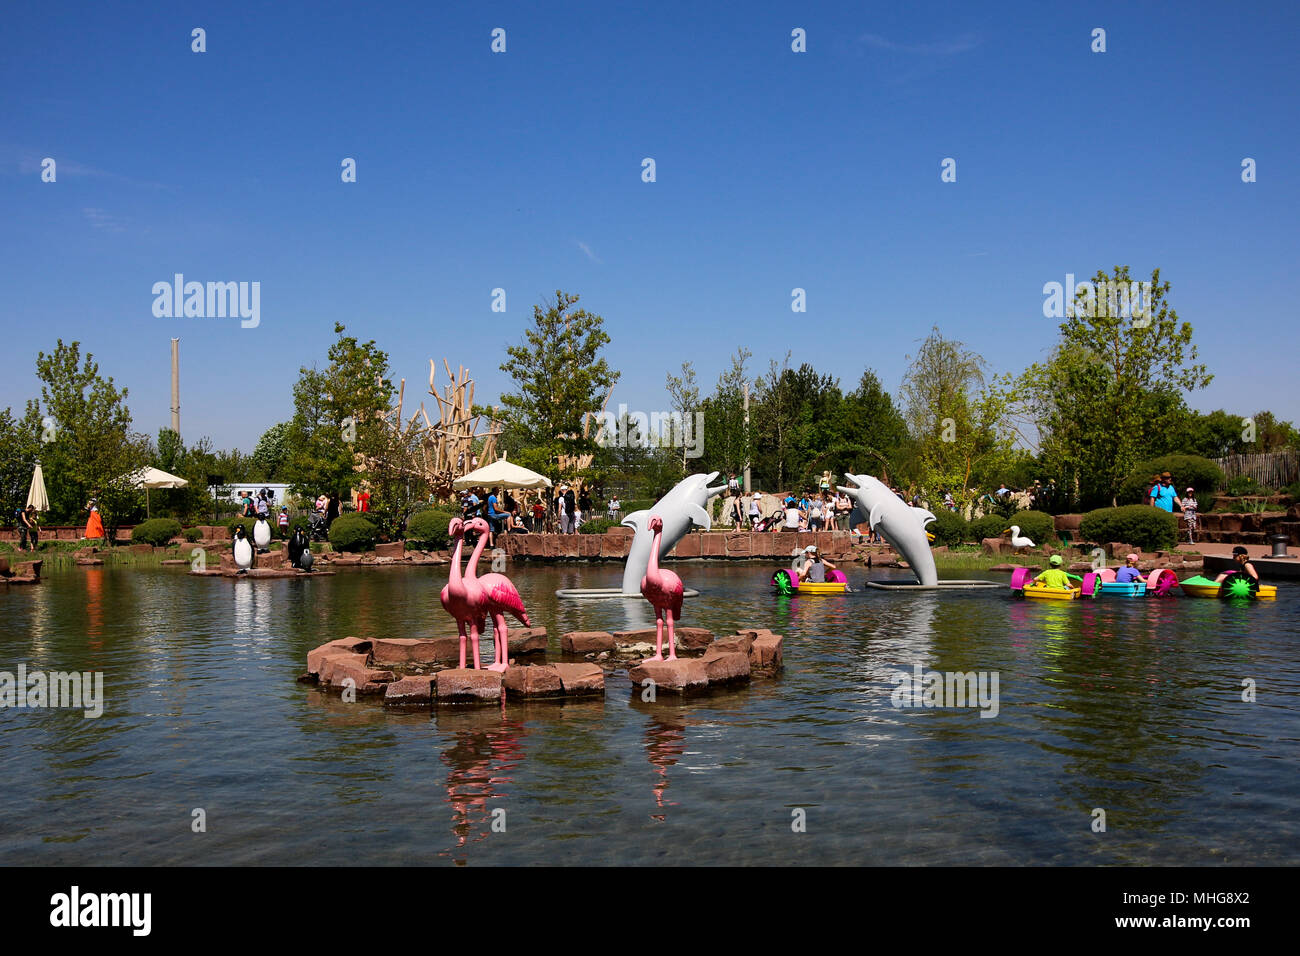 Zirndorf, Germany - April 29, 2018: View of a small lake in the Playmobil  Funpark Zirndorf. Children can paddleboat and enjoy dolphins and flamingos  m Stock Photo - Alamy